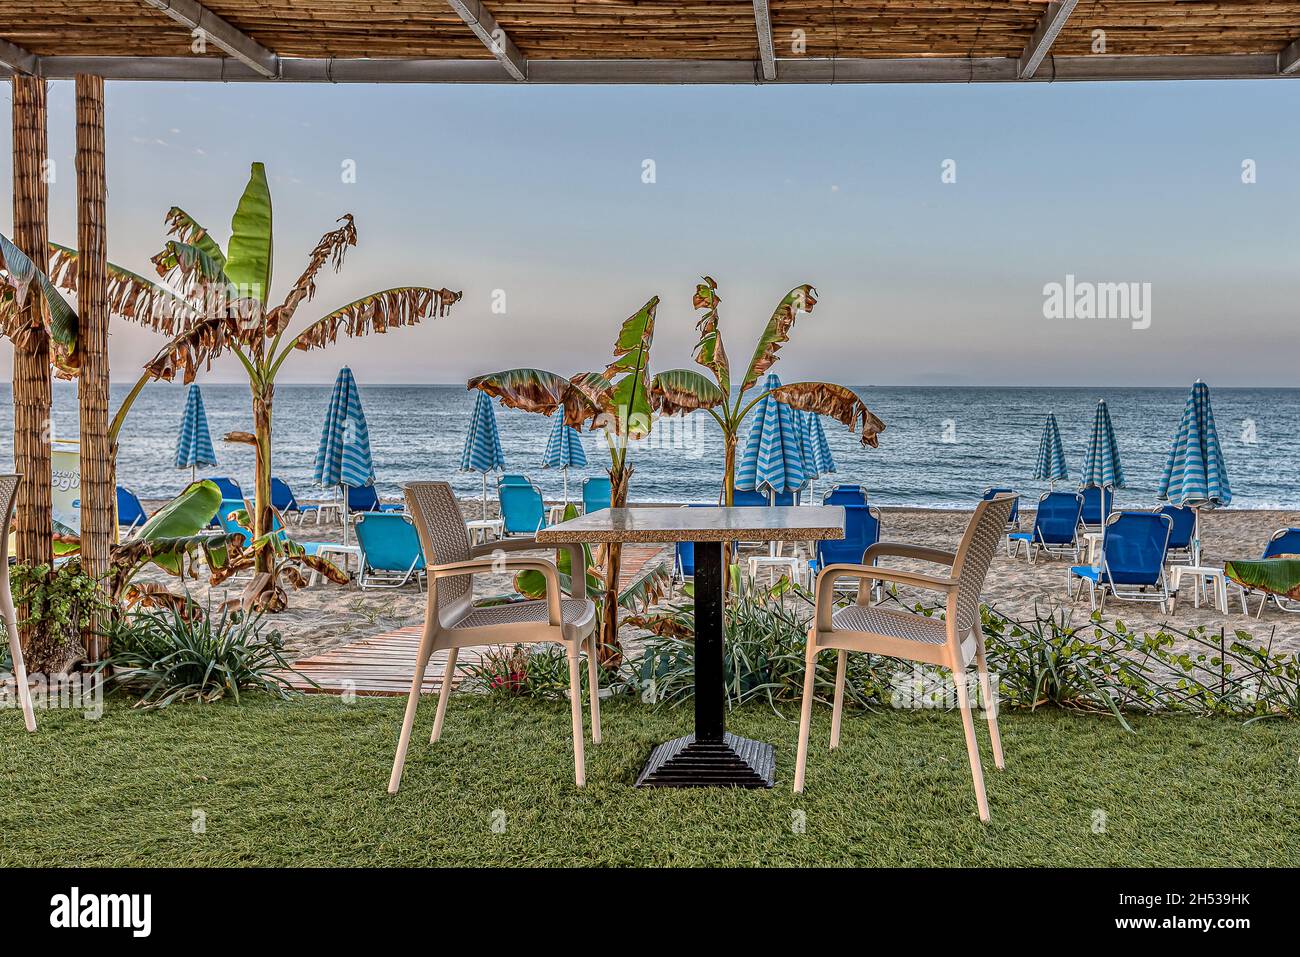 a table for two in a greek tavern overlocking the beach and the azure Mediterranean Sea, Crete, Greece, October 11, 2021 Stock Photo